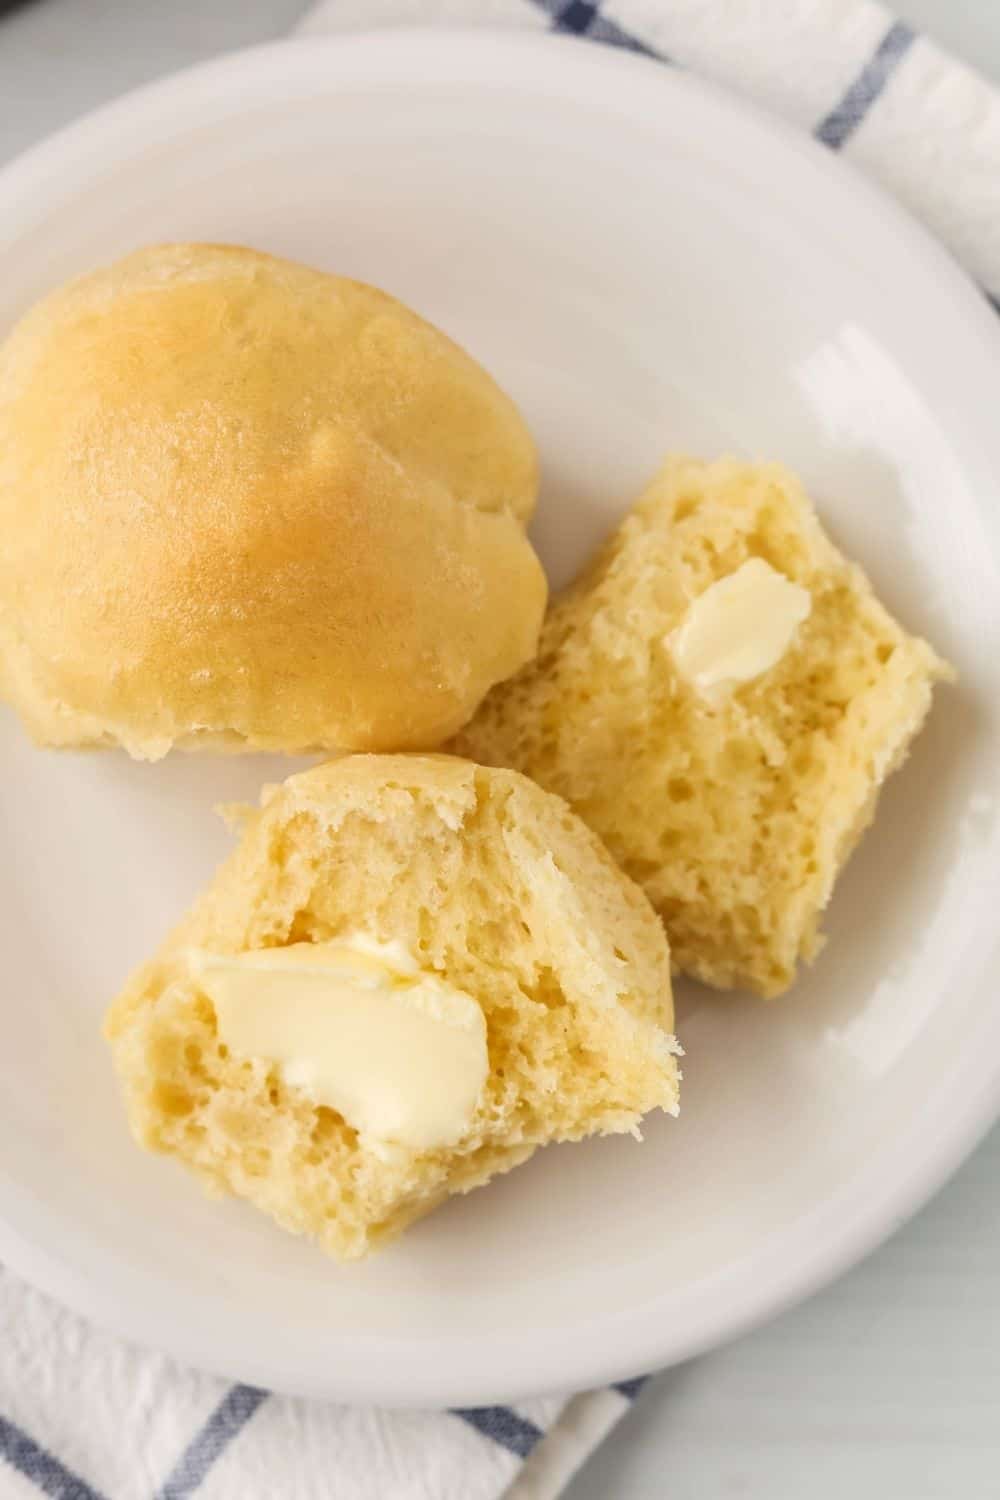 overhead view of dinner rolls that were proofed in the instant pot. One is sliced open and spread with butter, showing the fluffy interior.